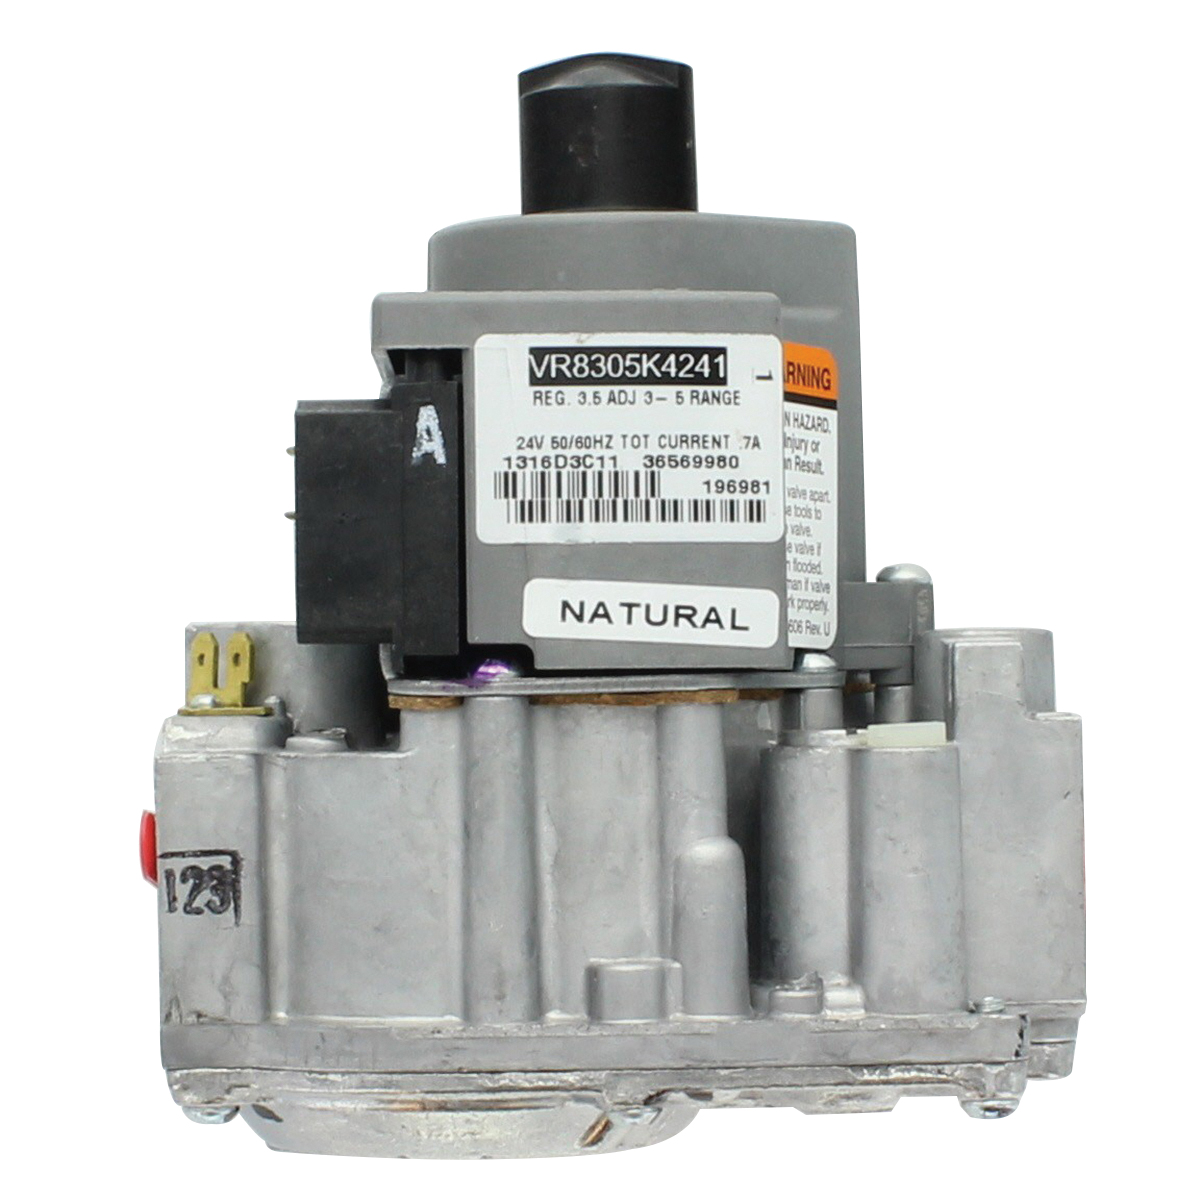 REZNOR® 196981 Gas Valve, 3/4 in Nominal, NPT Connection, Natural Gas Fuel, 1 -Stage